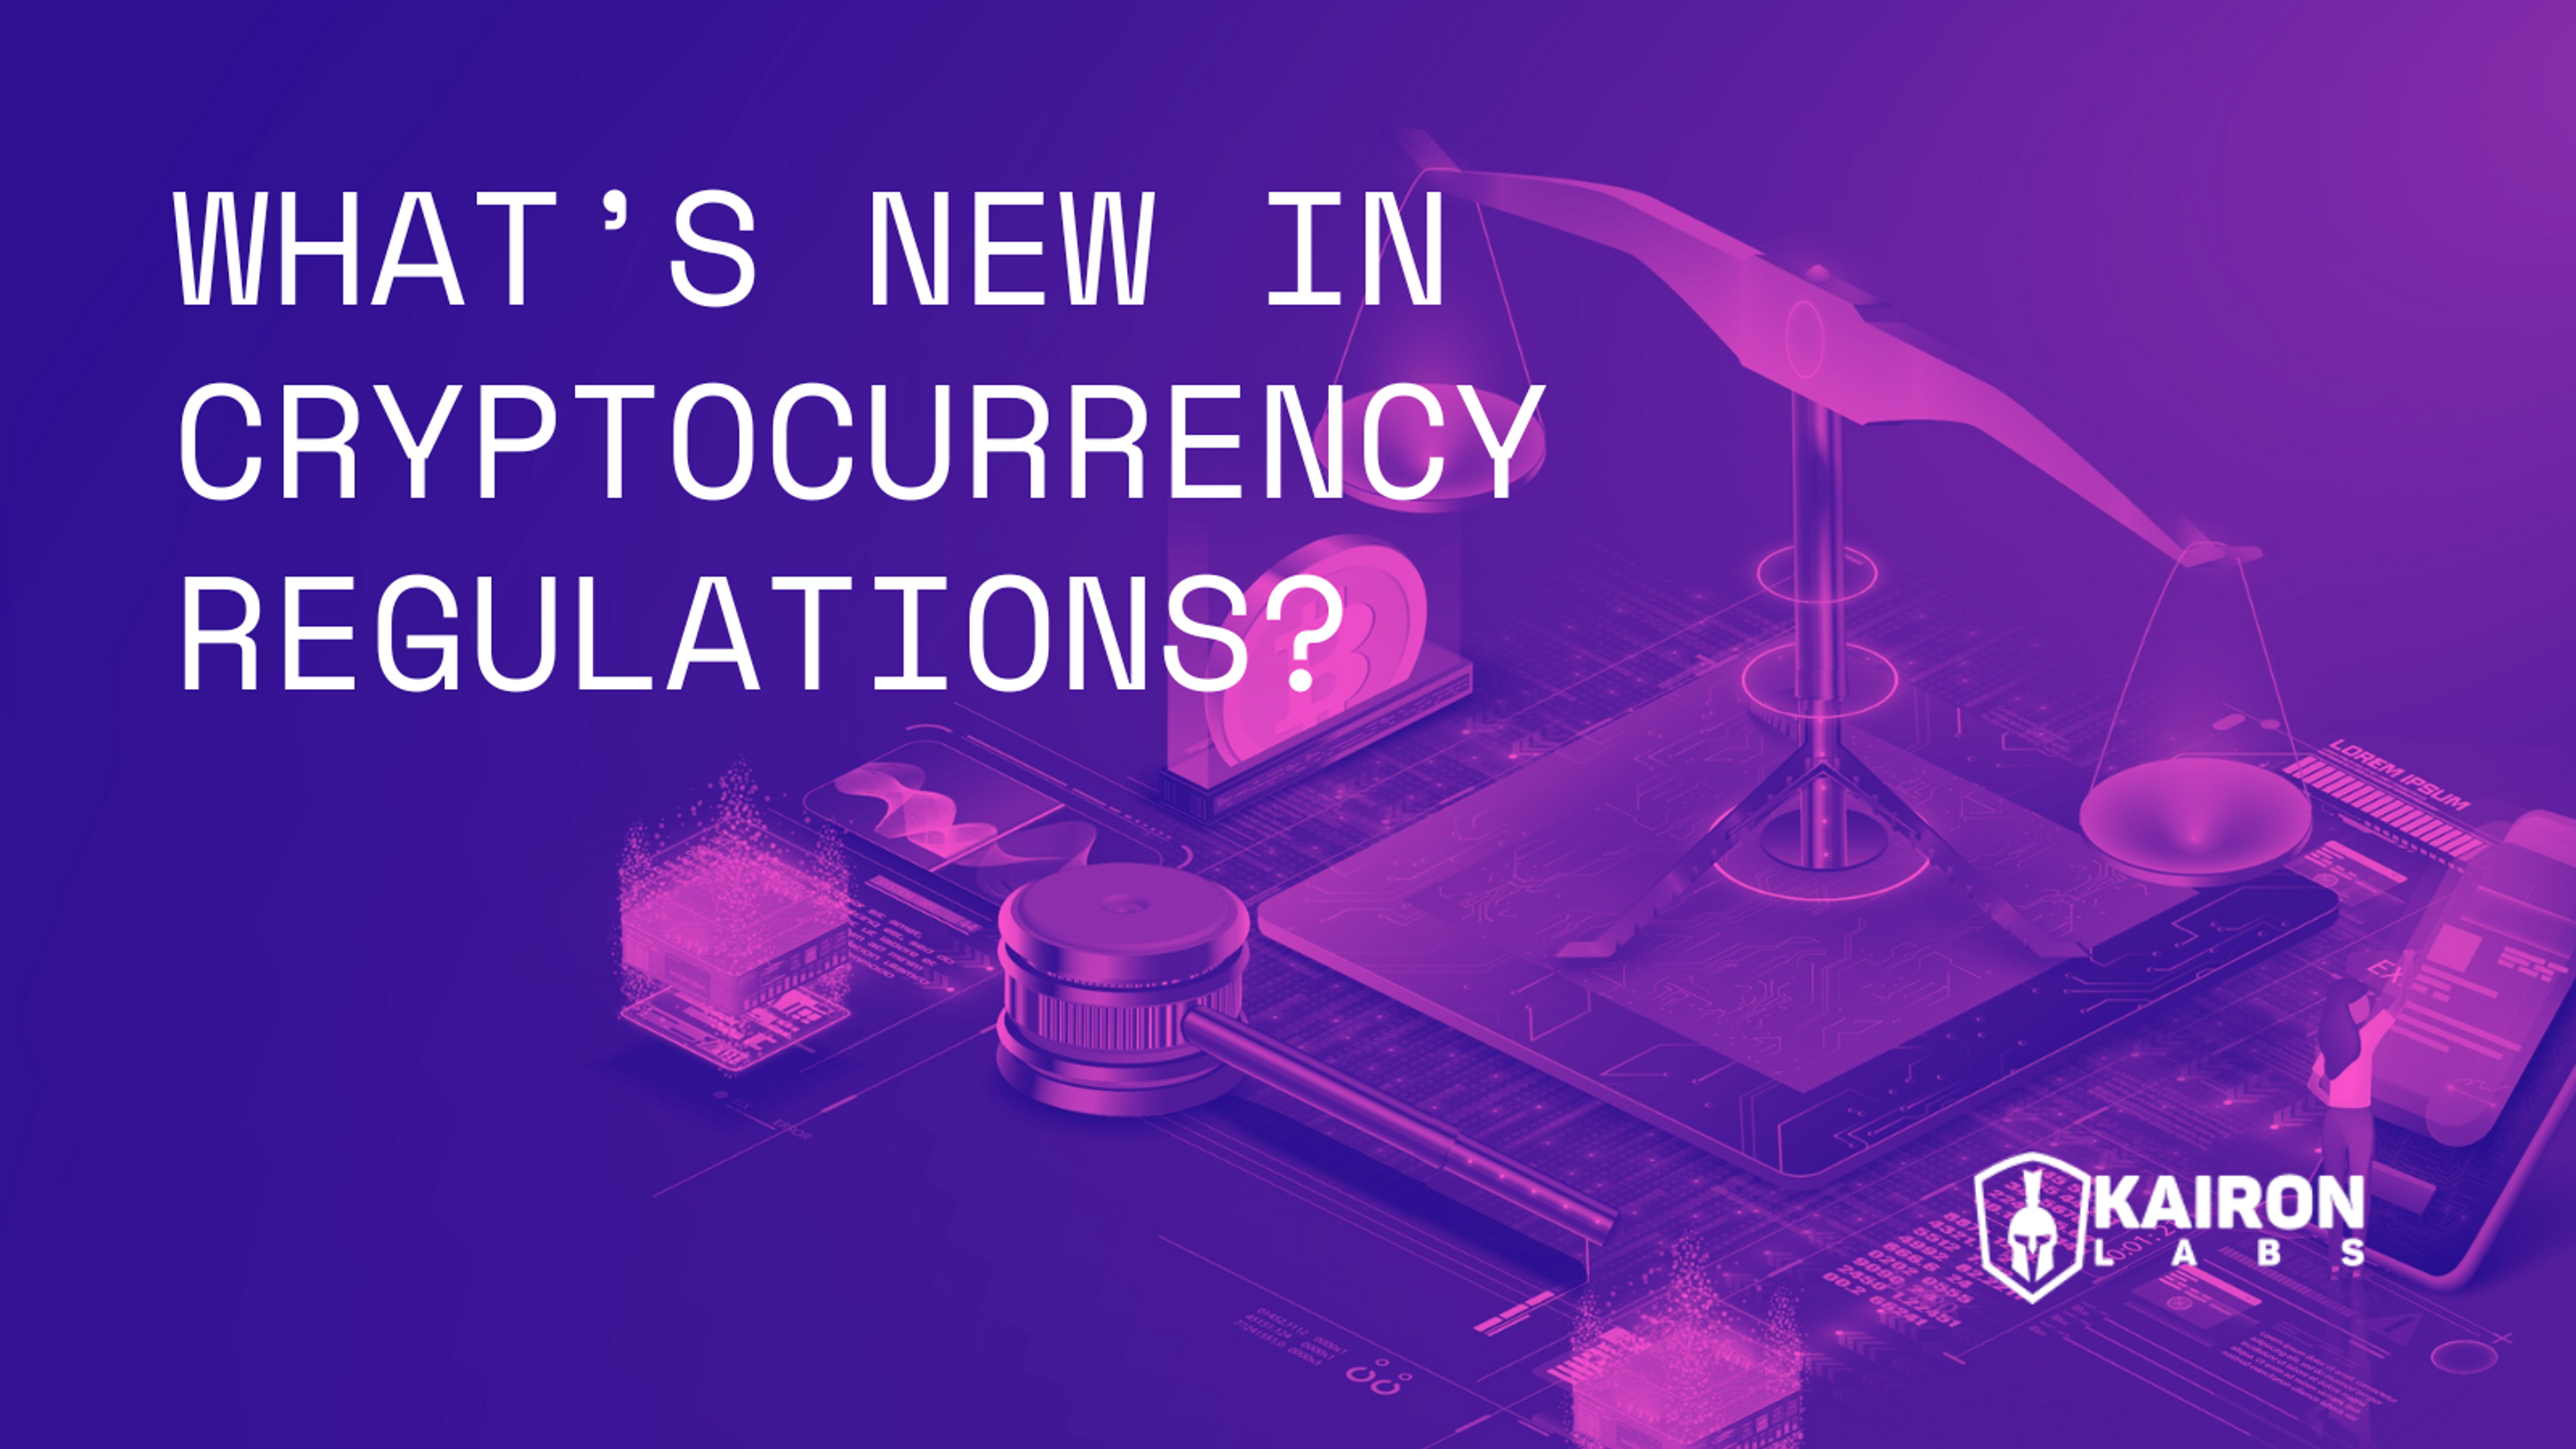 From Europe to the US: What’s New in Cryptocurrency Regulations?